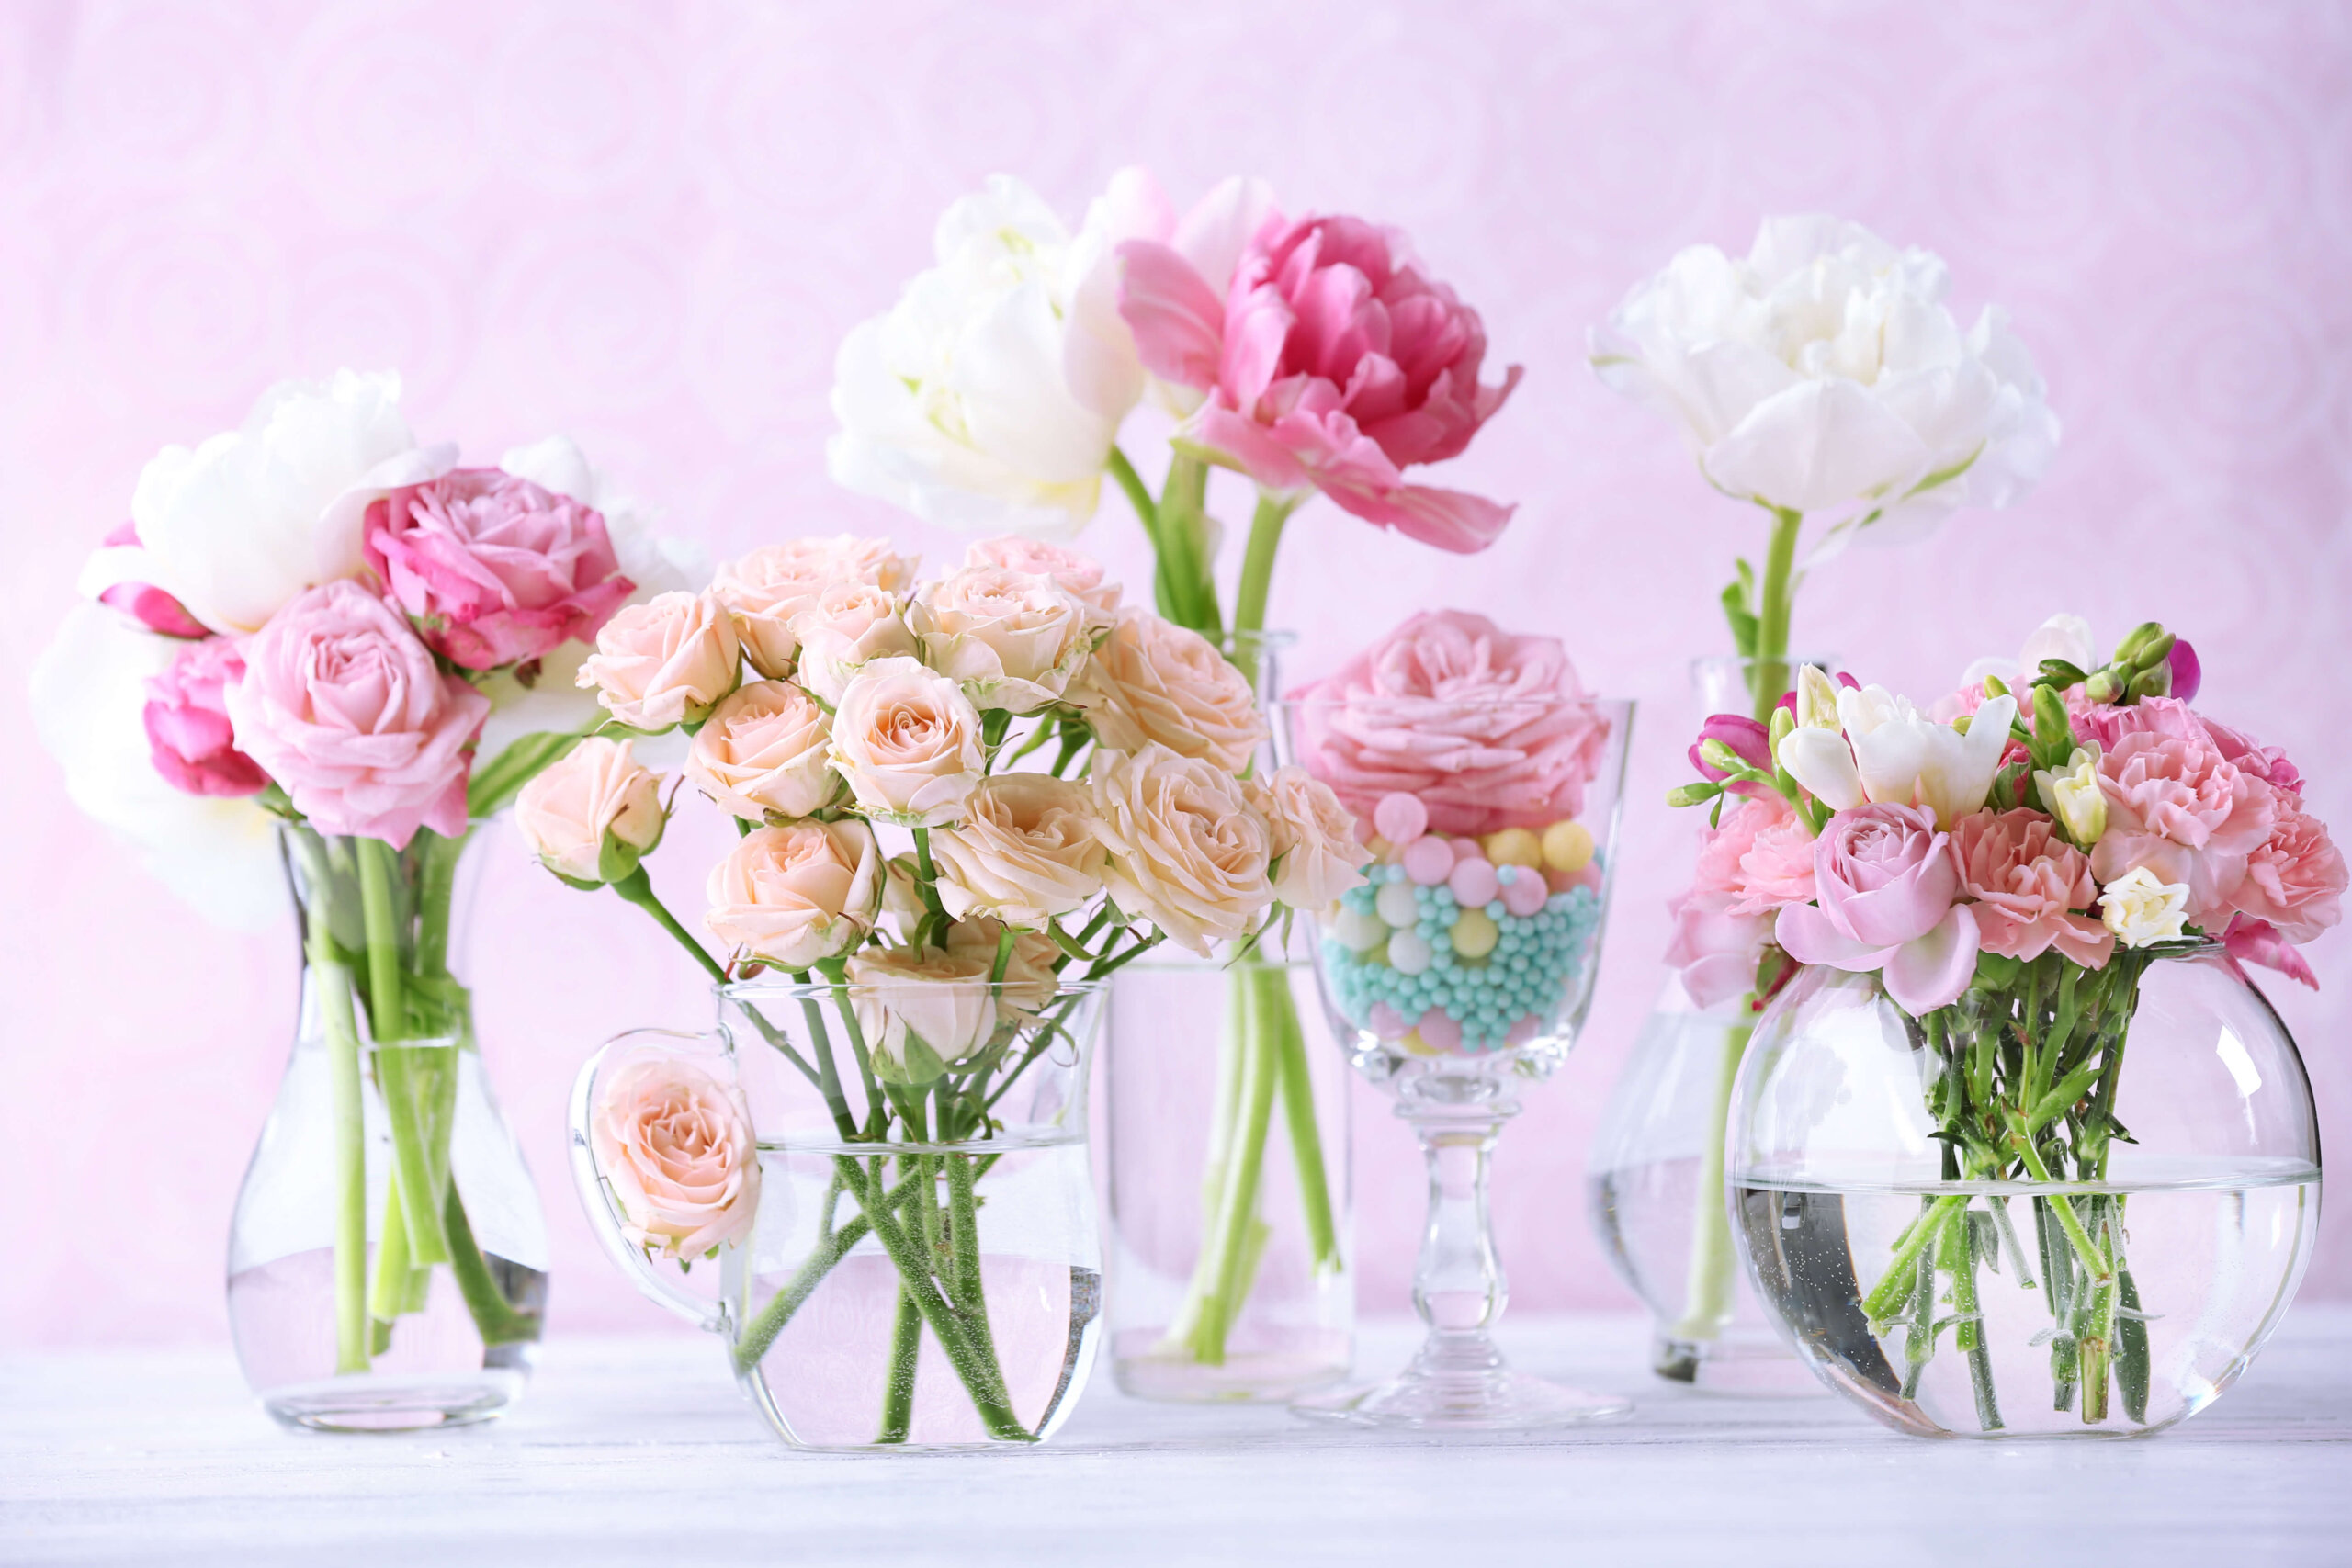 Tips and Tricks to Keep Flowers Fresh for a Longer Time